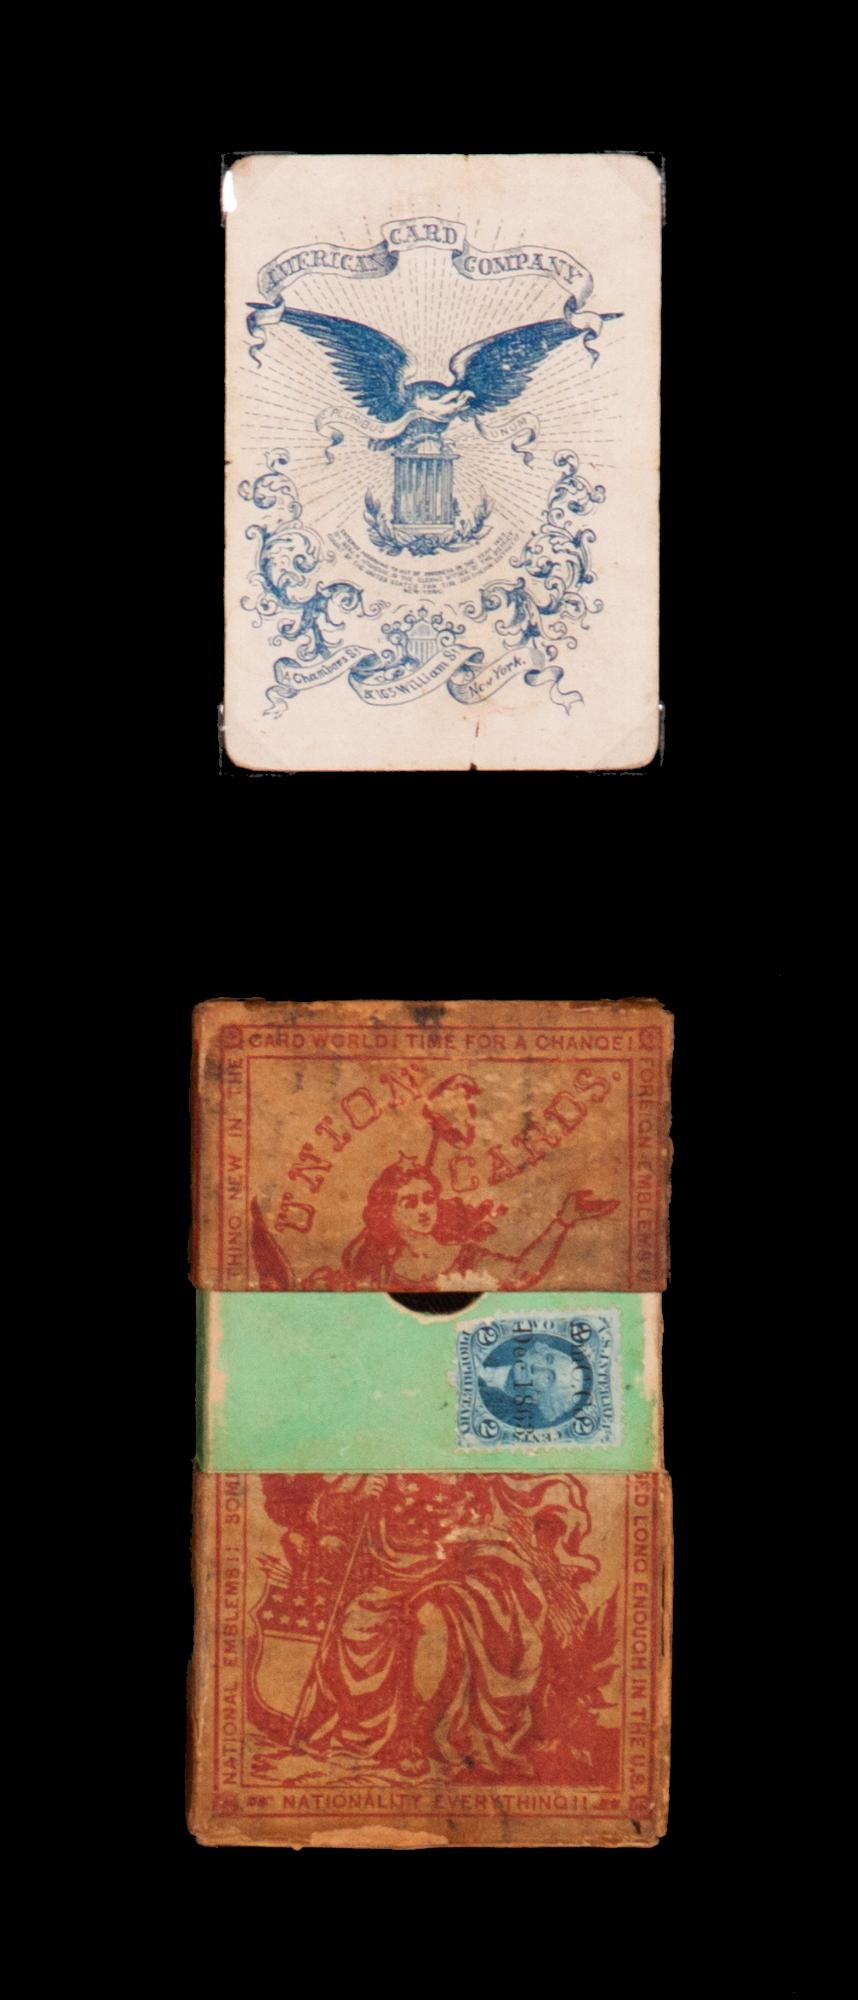 1862 Civil War playing cards with stars, flags, shields, & eagles, and face cards illustrating civil war officers and lady, Columbia, ca 1862, Benjamin Hitchcock, New York

1862 Civil War playing cards with suits represented by stars, flags,